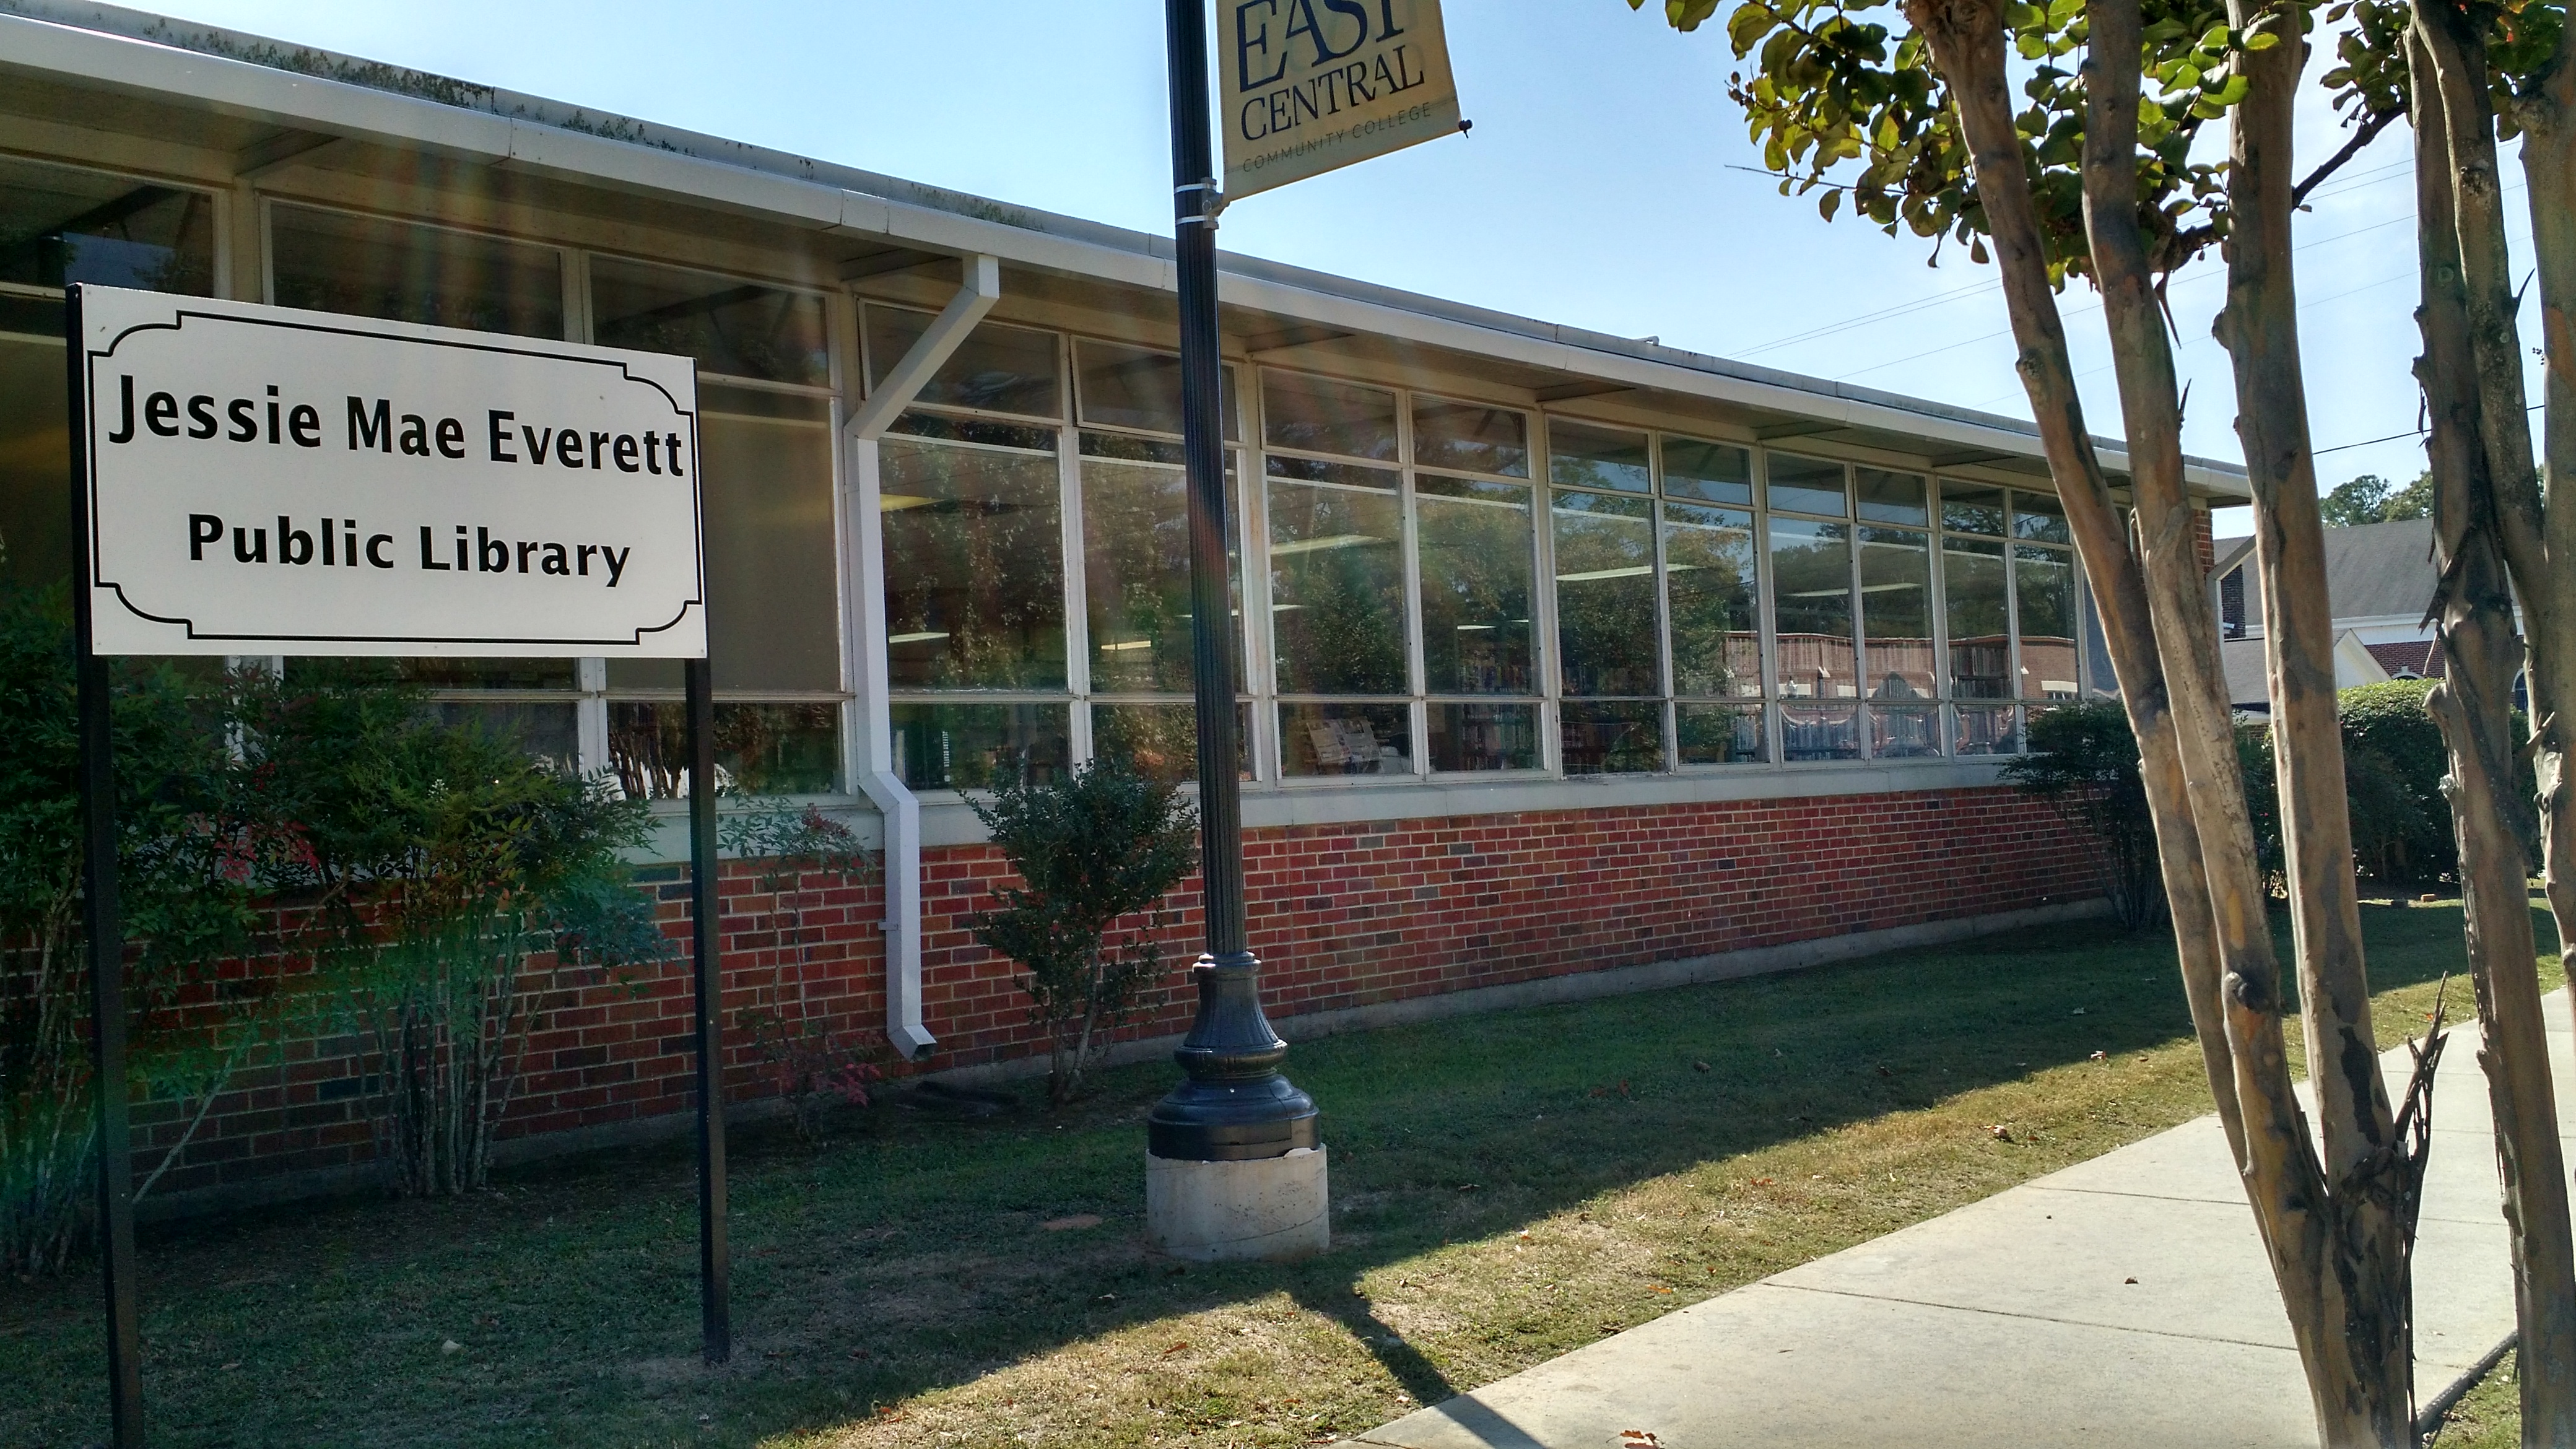 Street view of Jessie Mae Everett Public Library in Decatur, Mississippi.